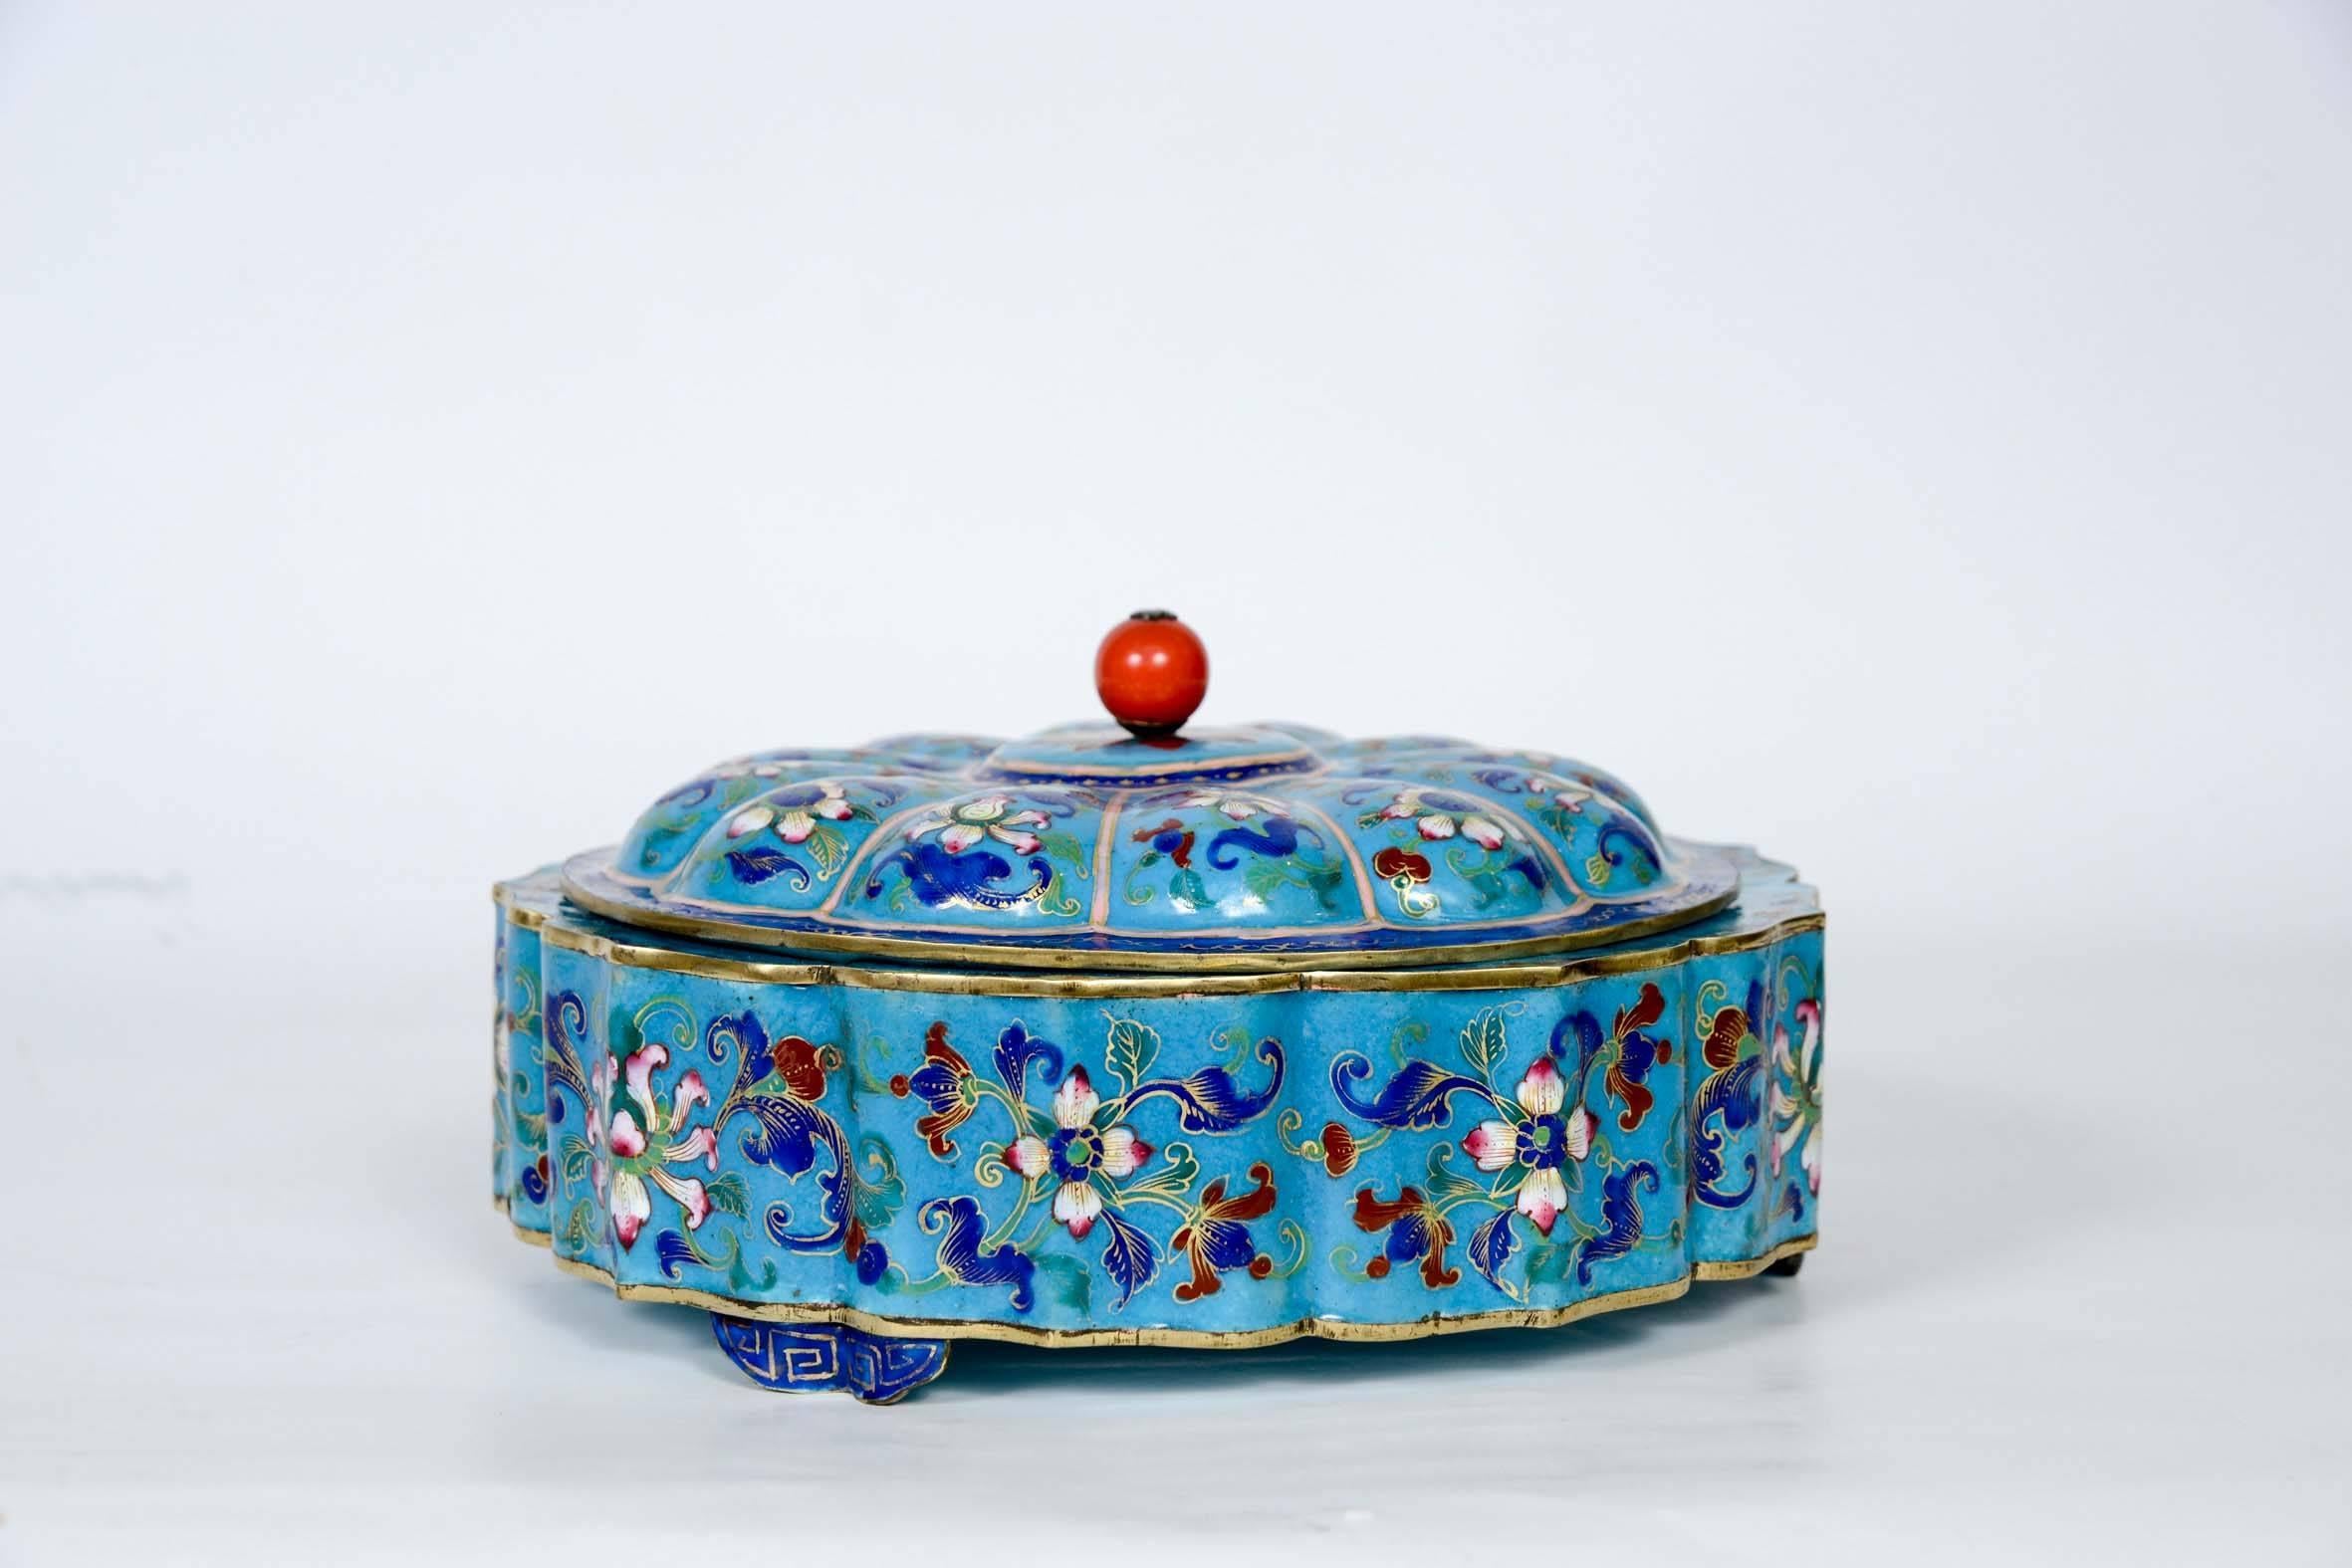 Charming enameled box with floral decor.